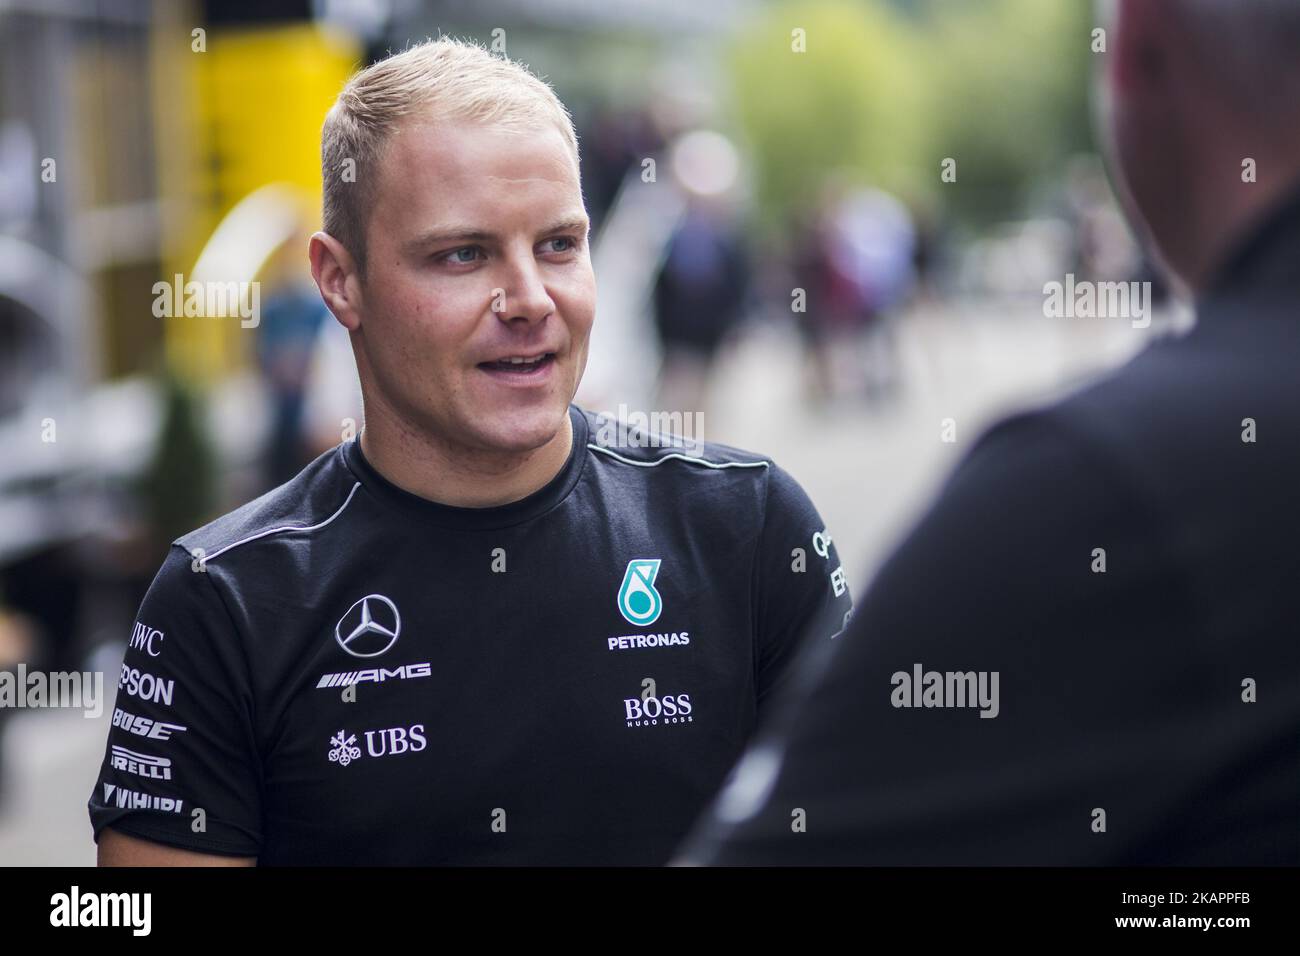 77 BOTTAS Valtteri from Finland of team Mercedes GP during the Formula One Belgian Grand Prix at Circuit de Spa-Francorchamps on August 24, 2017 in Spa, Belgium. (Photo by Xavier Bonilla/NurPhoto) Stock Photo